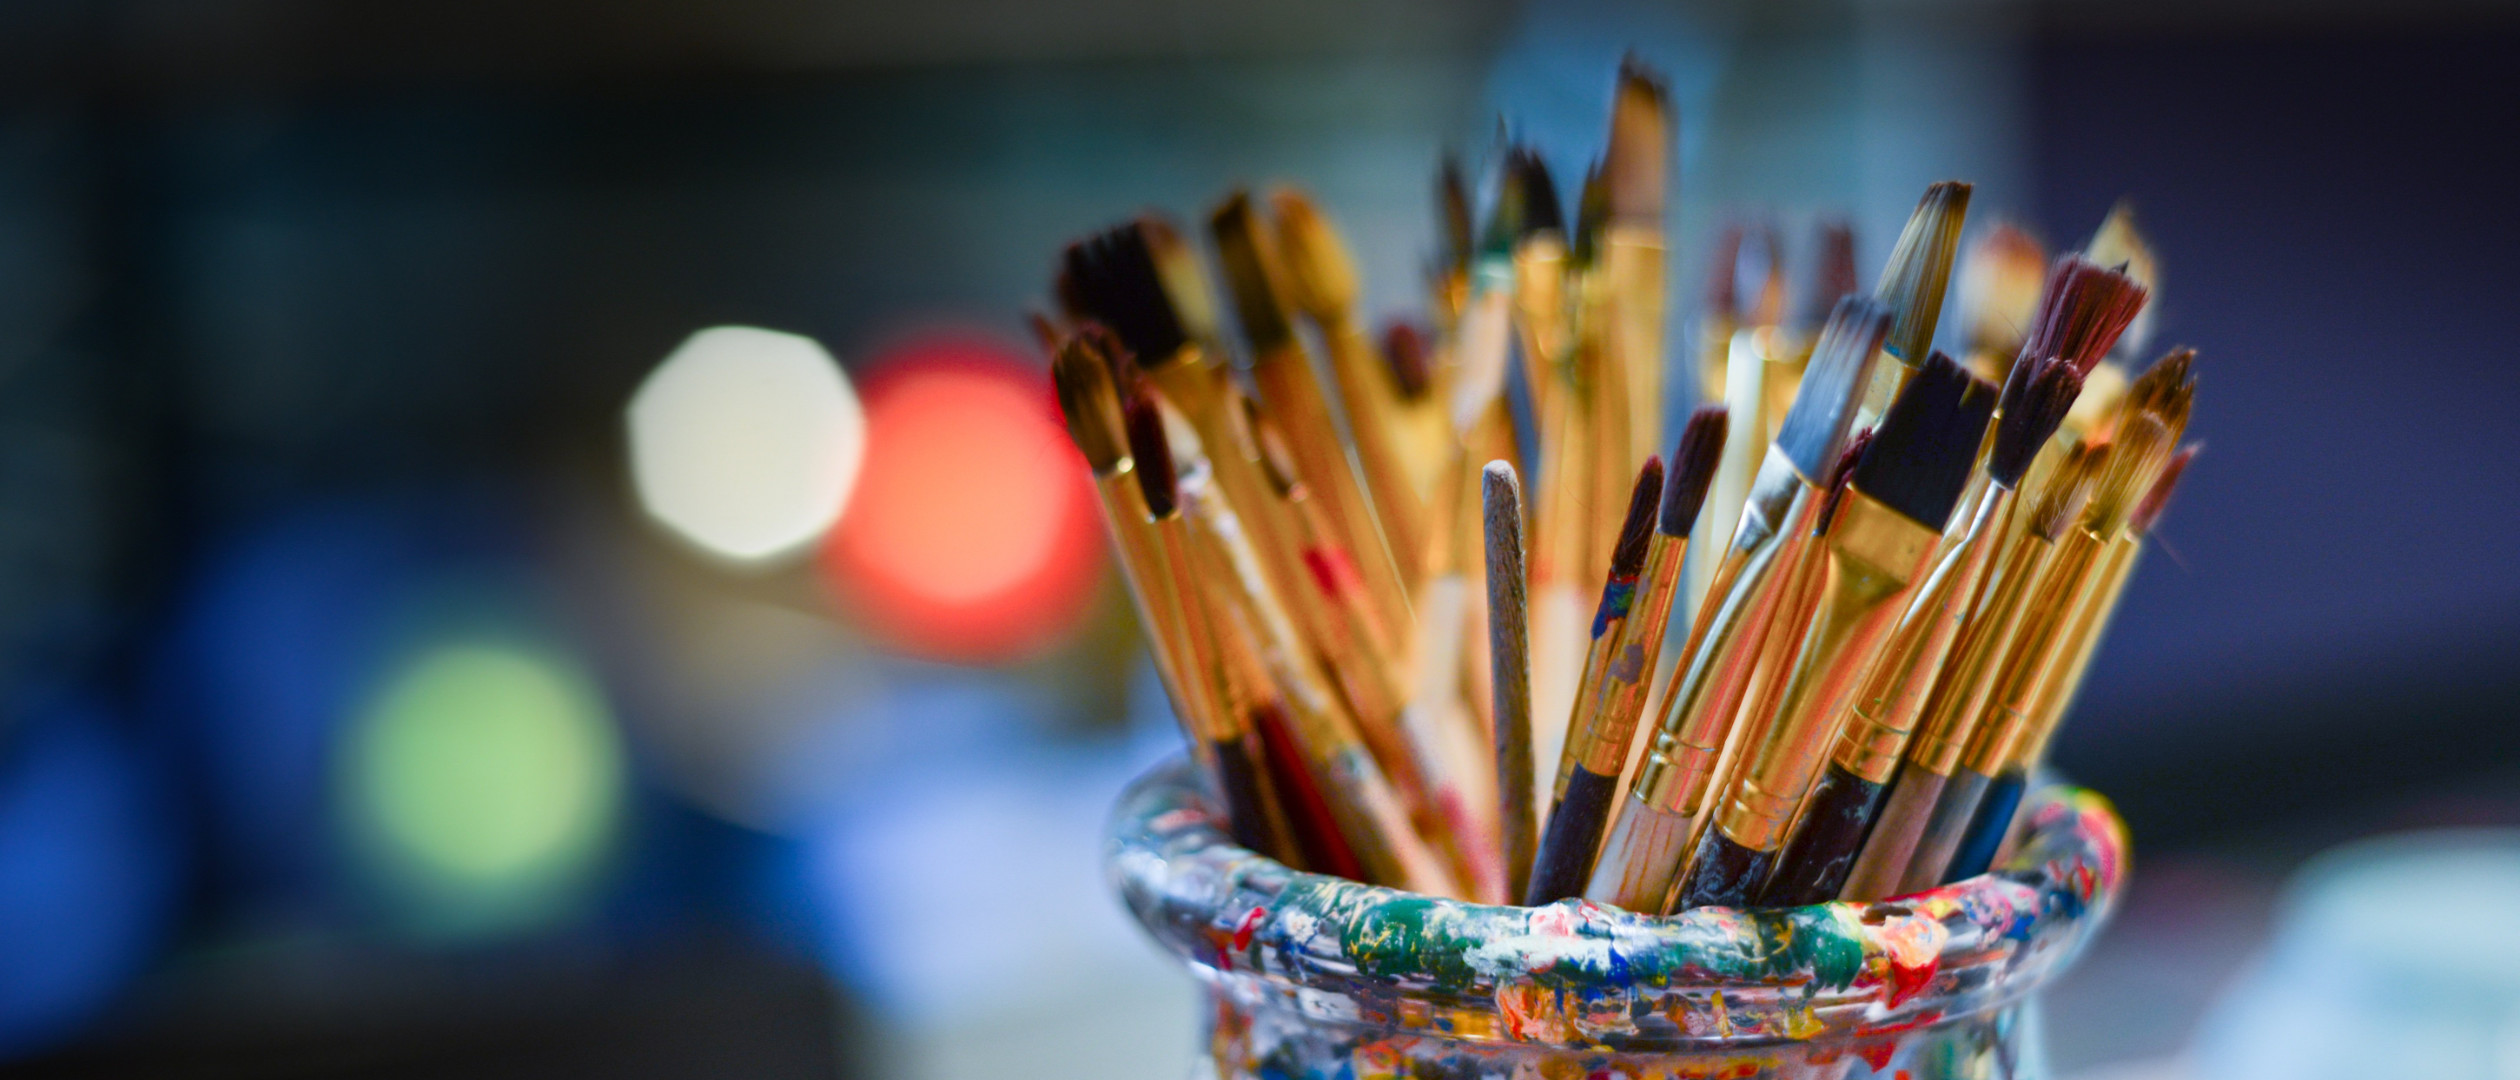 photo by Rudy and Peter Skitterians of paintbrushes in a jar